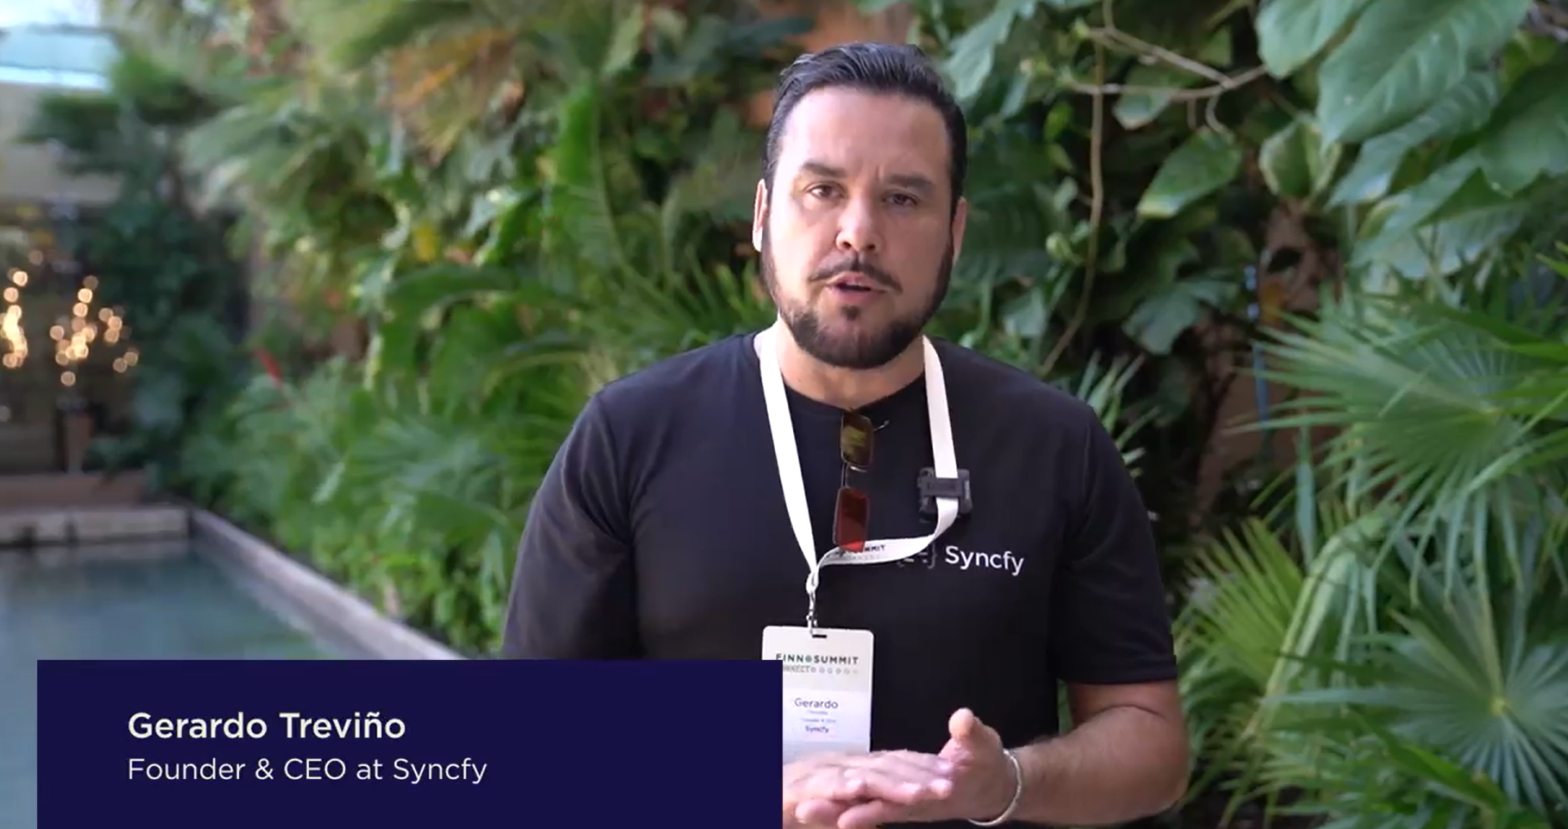 Remembering Syncfy’s participation in FINNOSUMMIT Connect